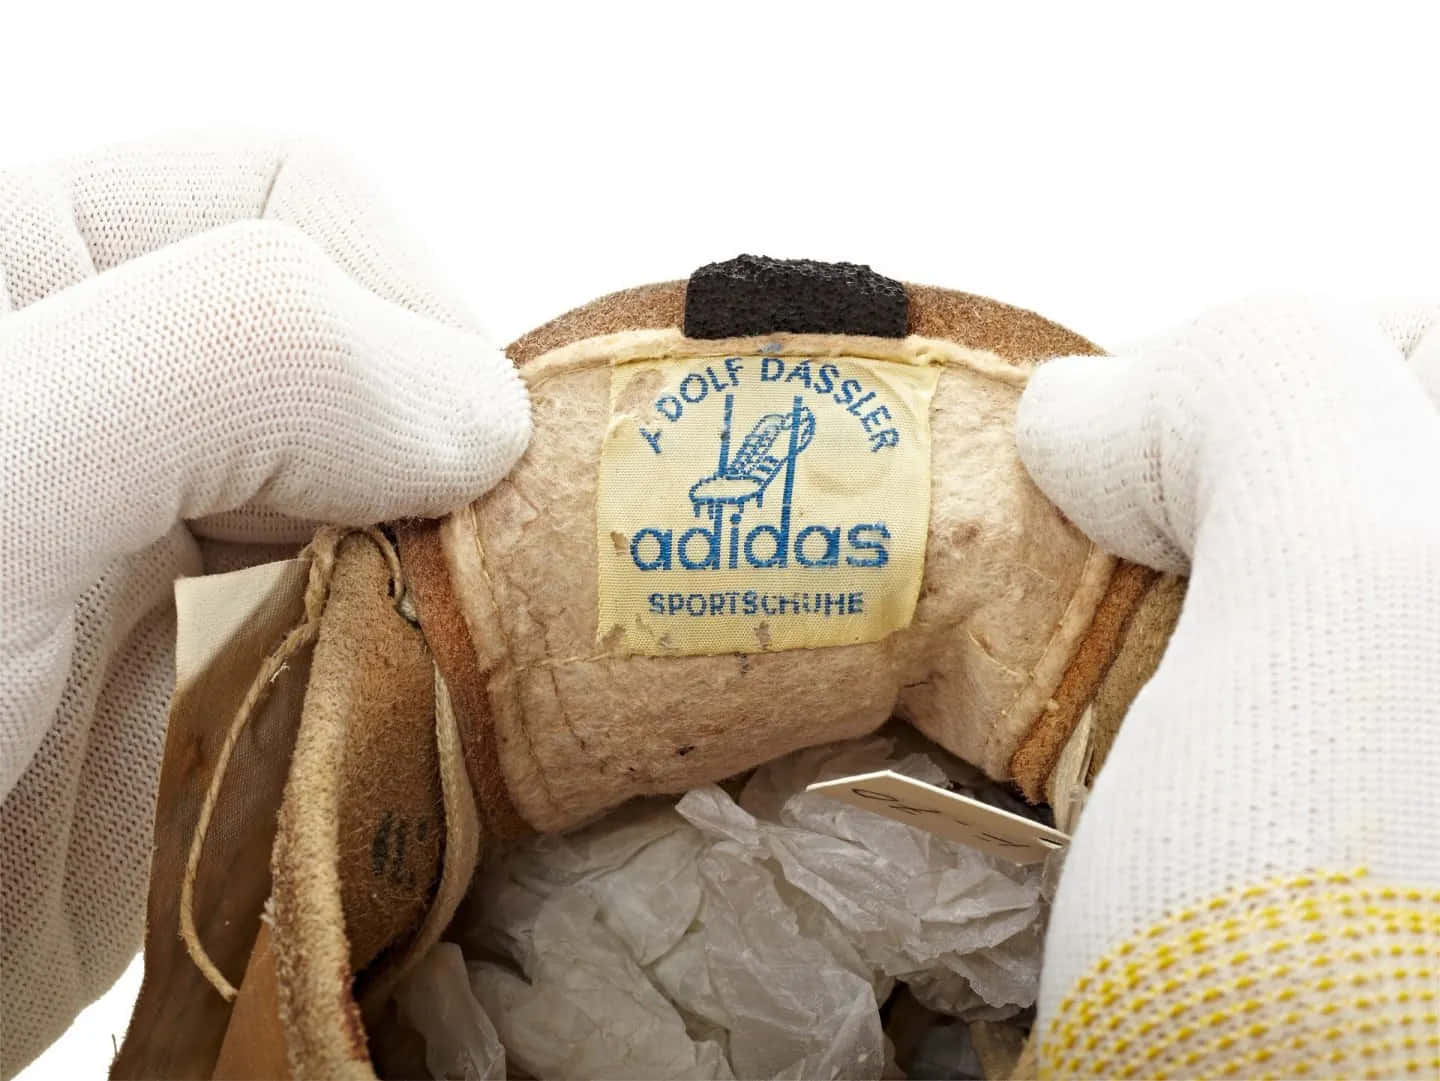 "Structured yet stylish, welcome to the world of Adidas"